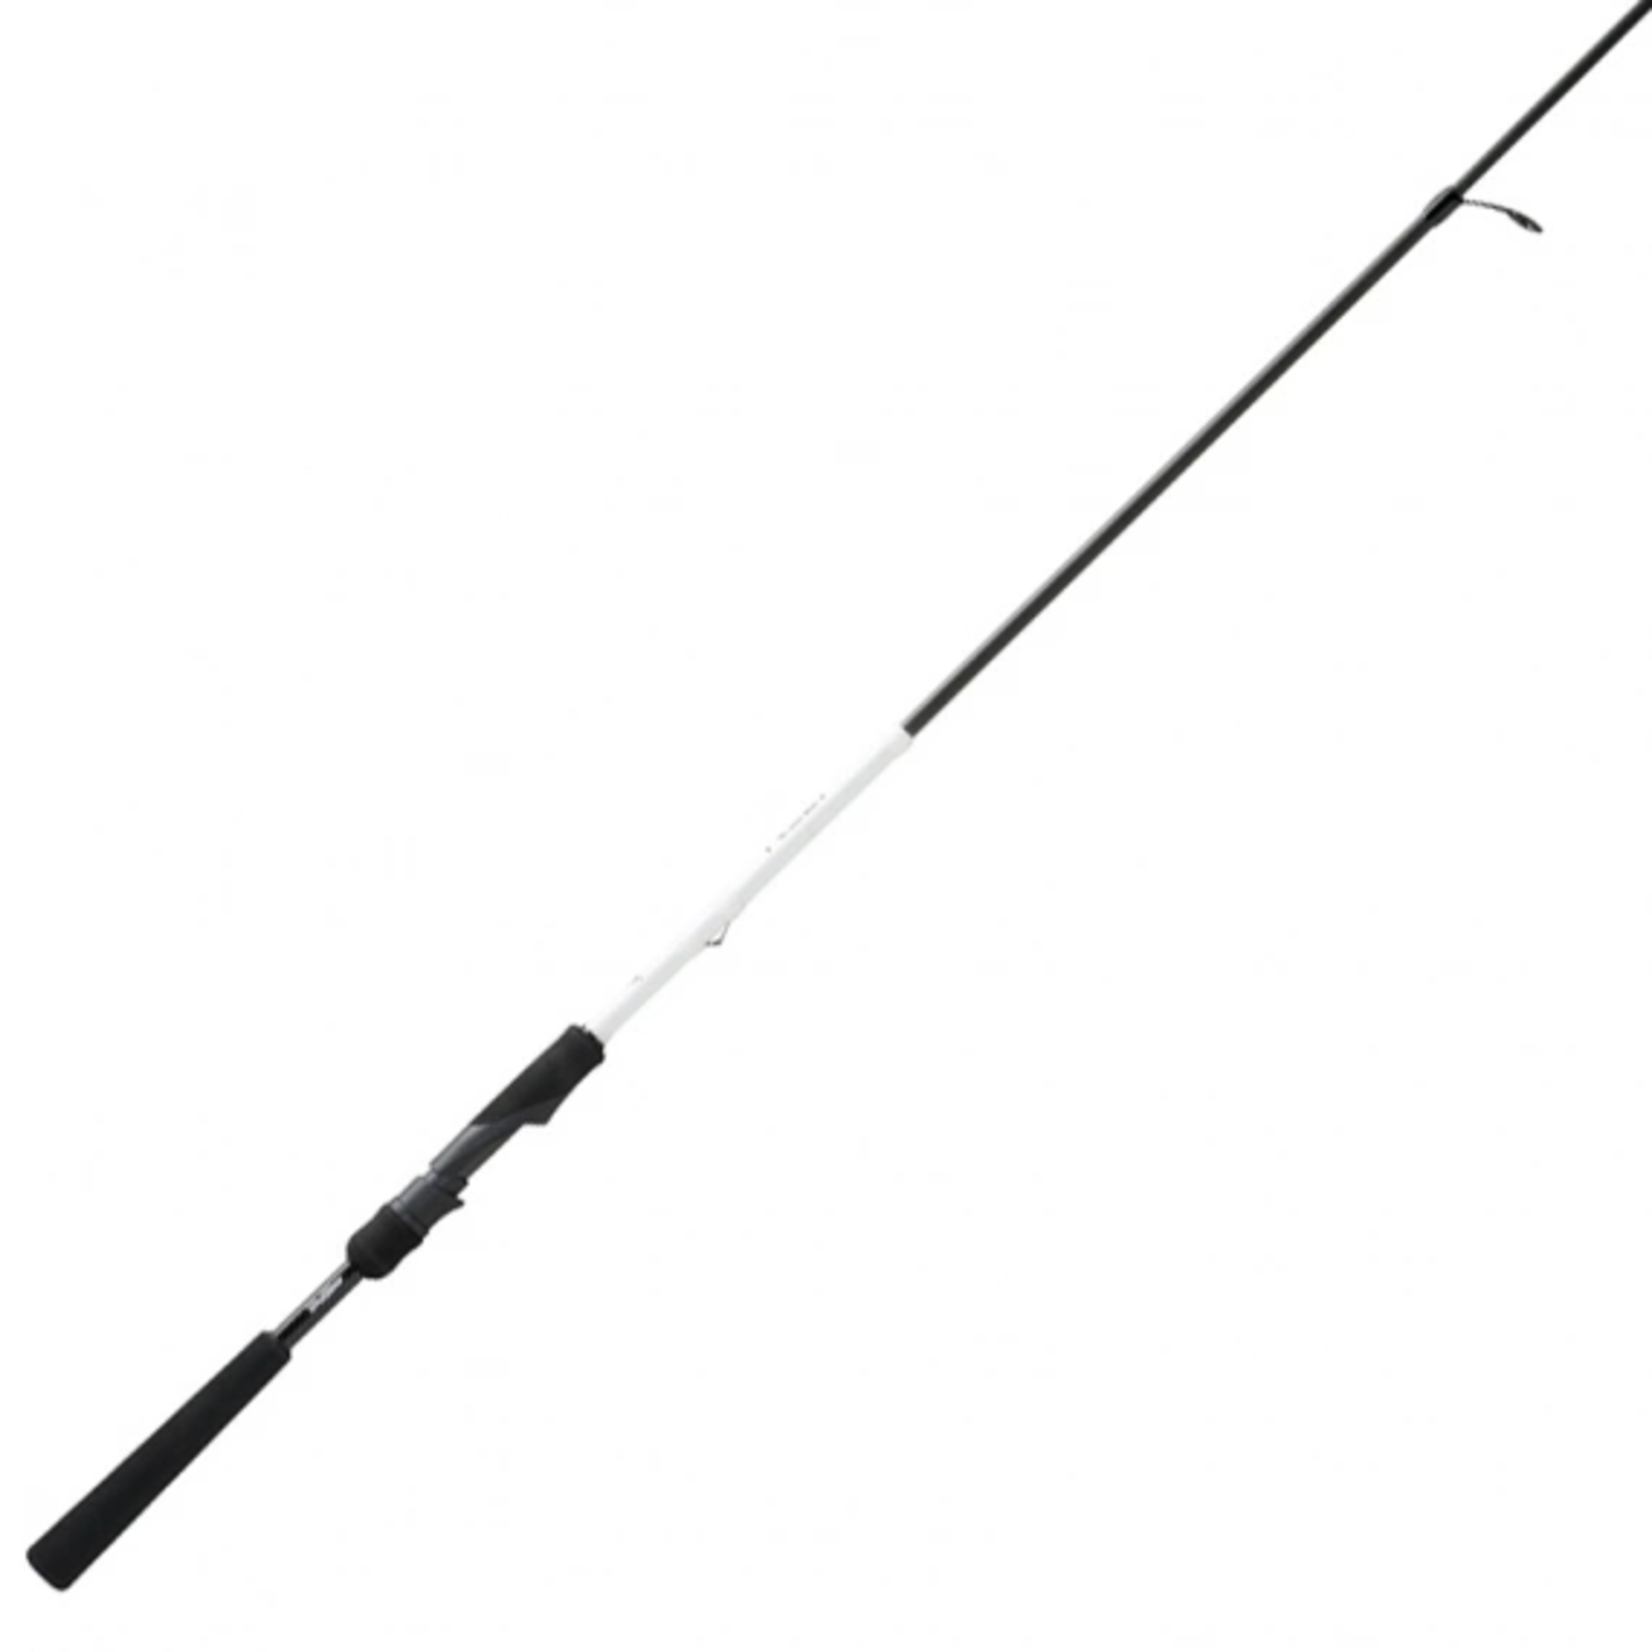 13 FISHING Canne Lancer Léger Télescopique 13 Fishing Black Rely 7' Light